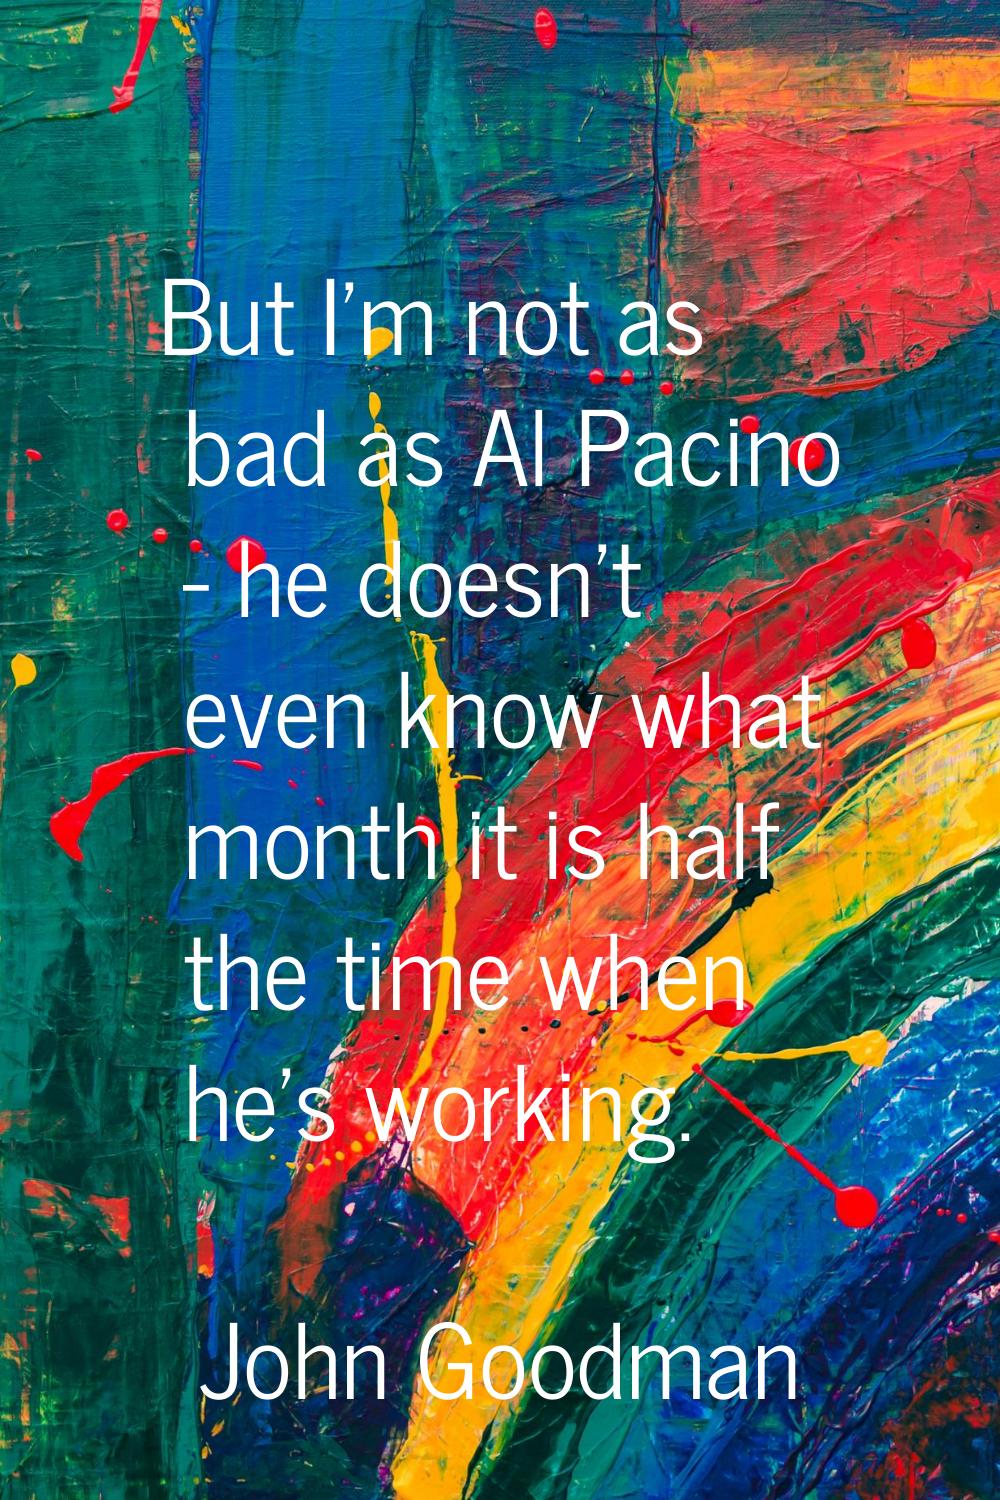 But I'm not as bad as Al Pacino - he doesn't even know what month it is half the time when he's wor